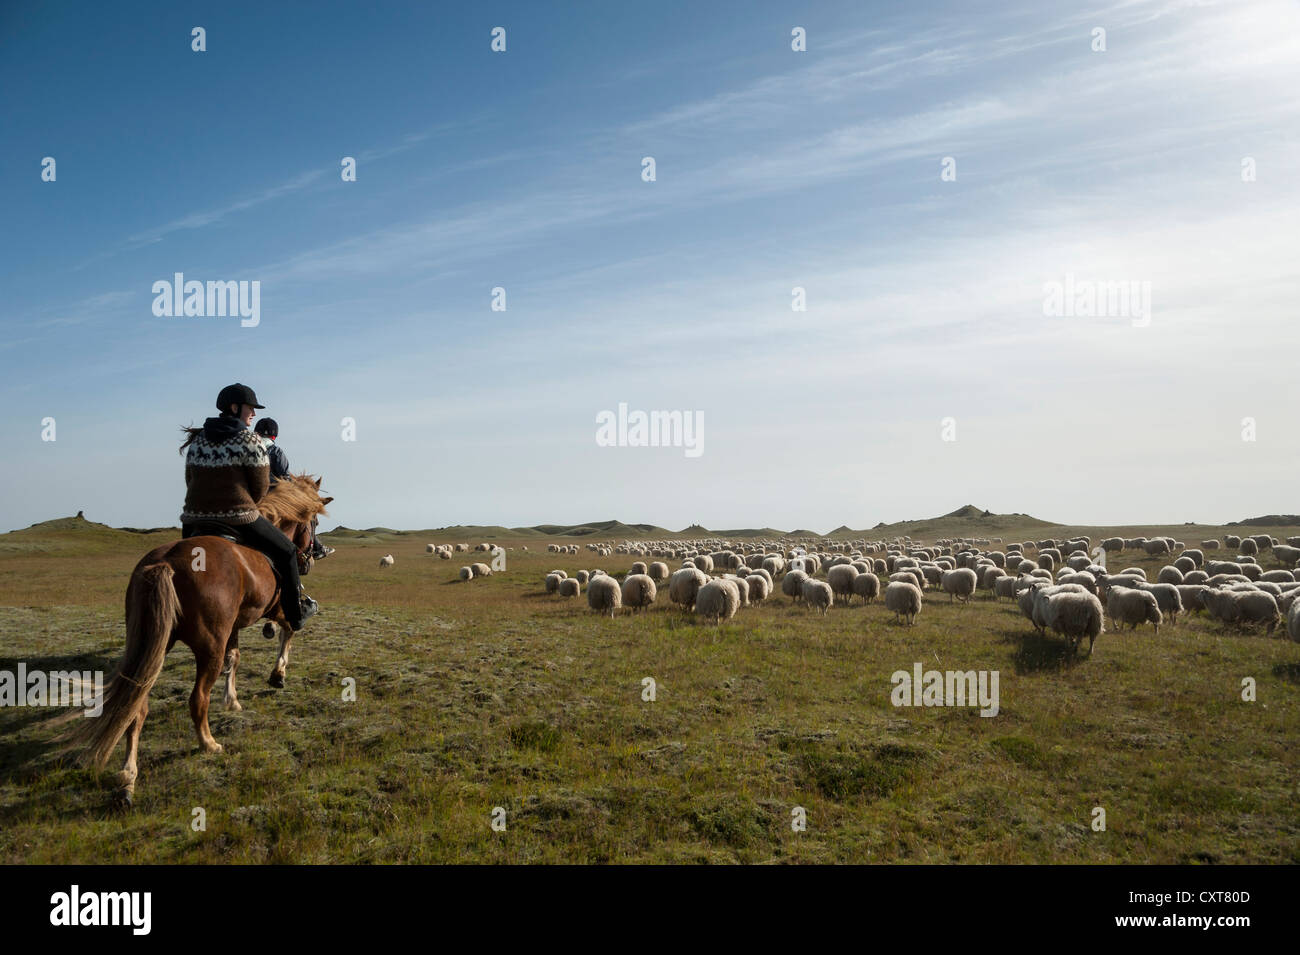 Flock of sheep on a green meadow or pasture, rider on a horse, bringing down sheep in Kirkjubæjarklaustur, South Iceland Stock Photo